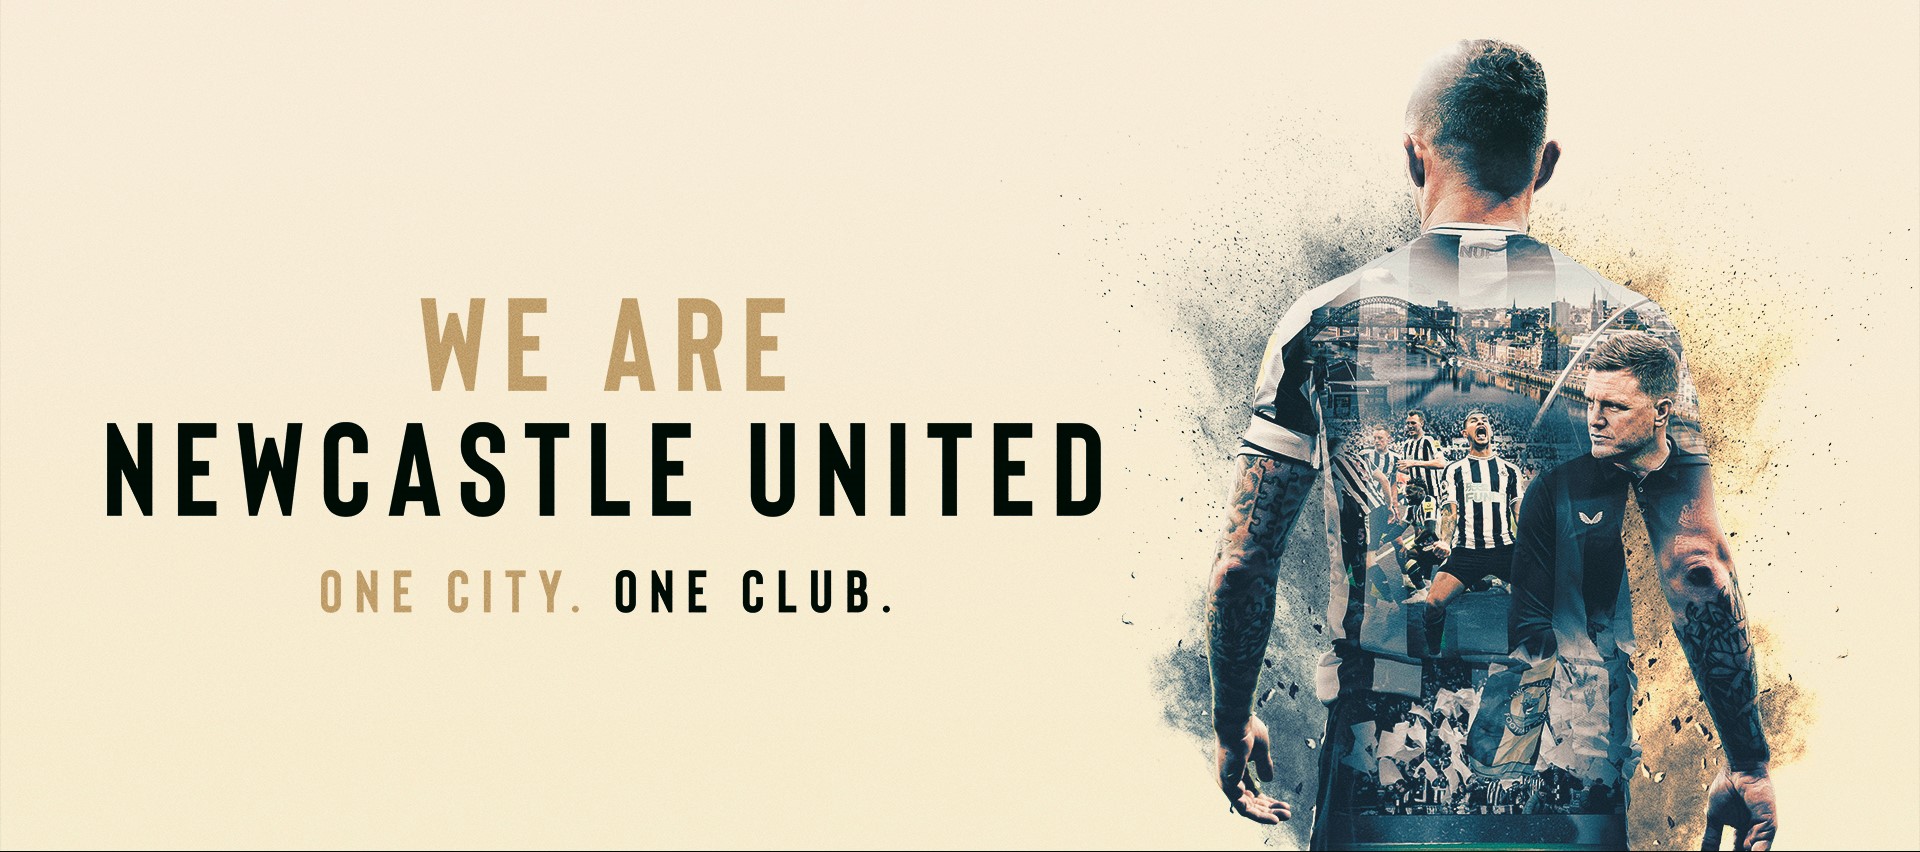 We Are Newcastle United Launches Weekly on Prime Video From Friday 11th August